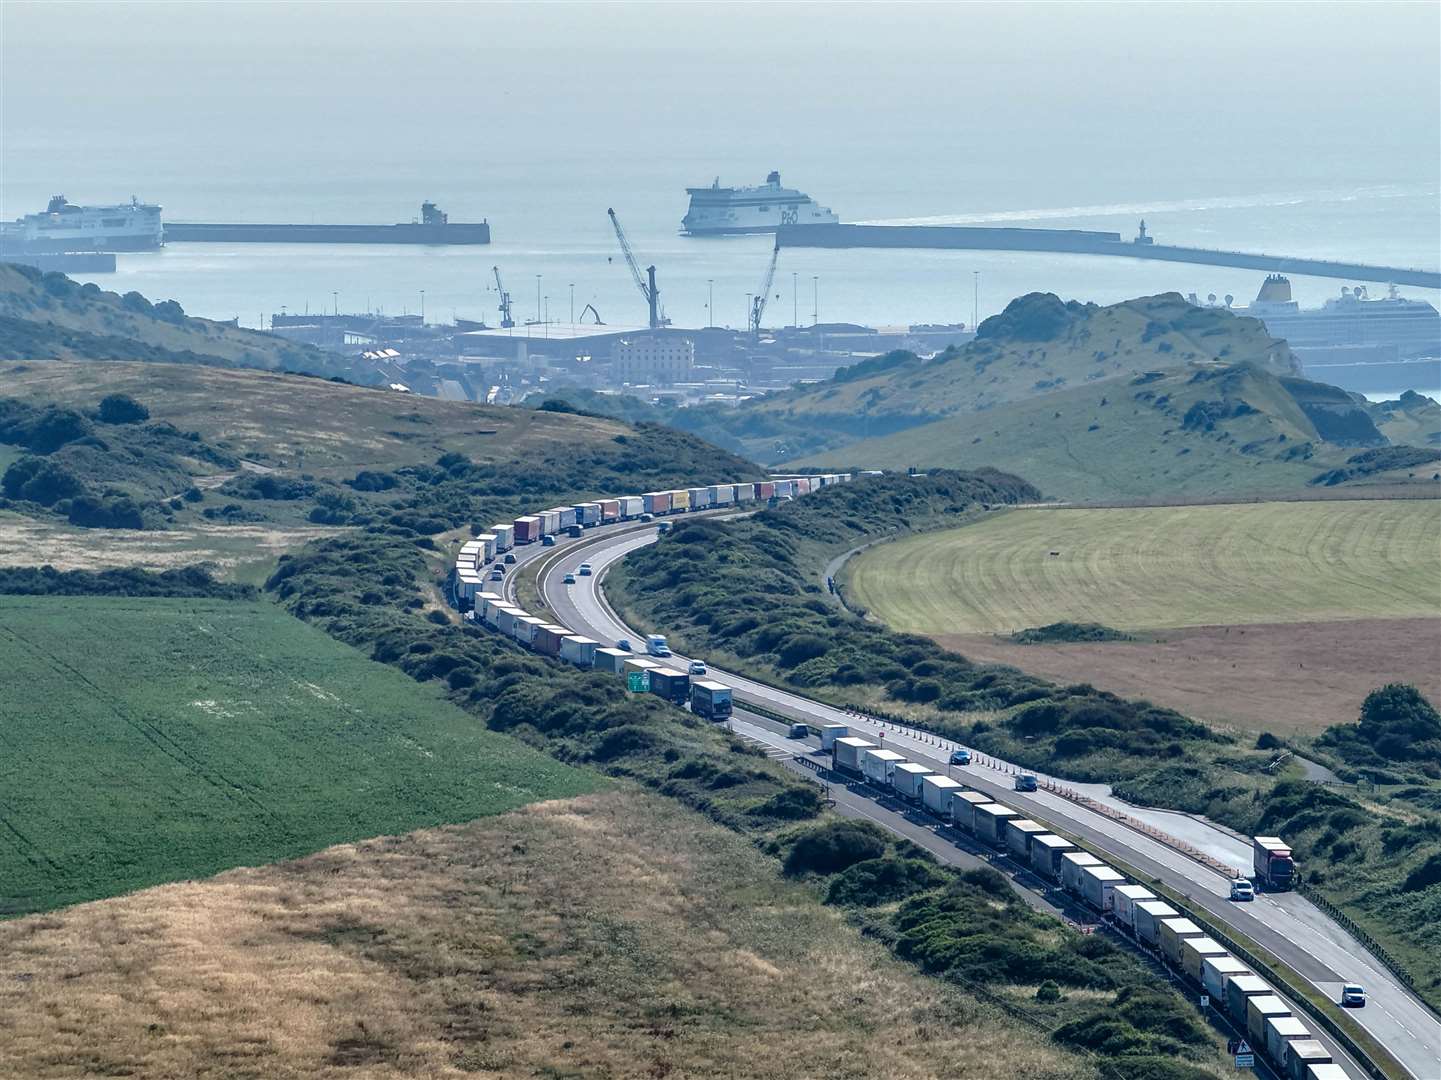 Dover TAP has been implemented on the A20, with hundreds of lorries queuing outside the town. Picture: UKNIP